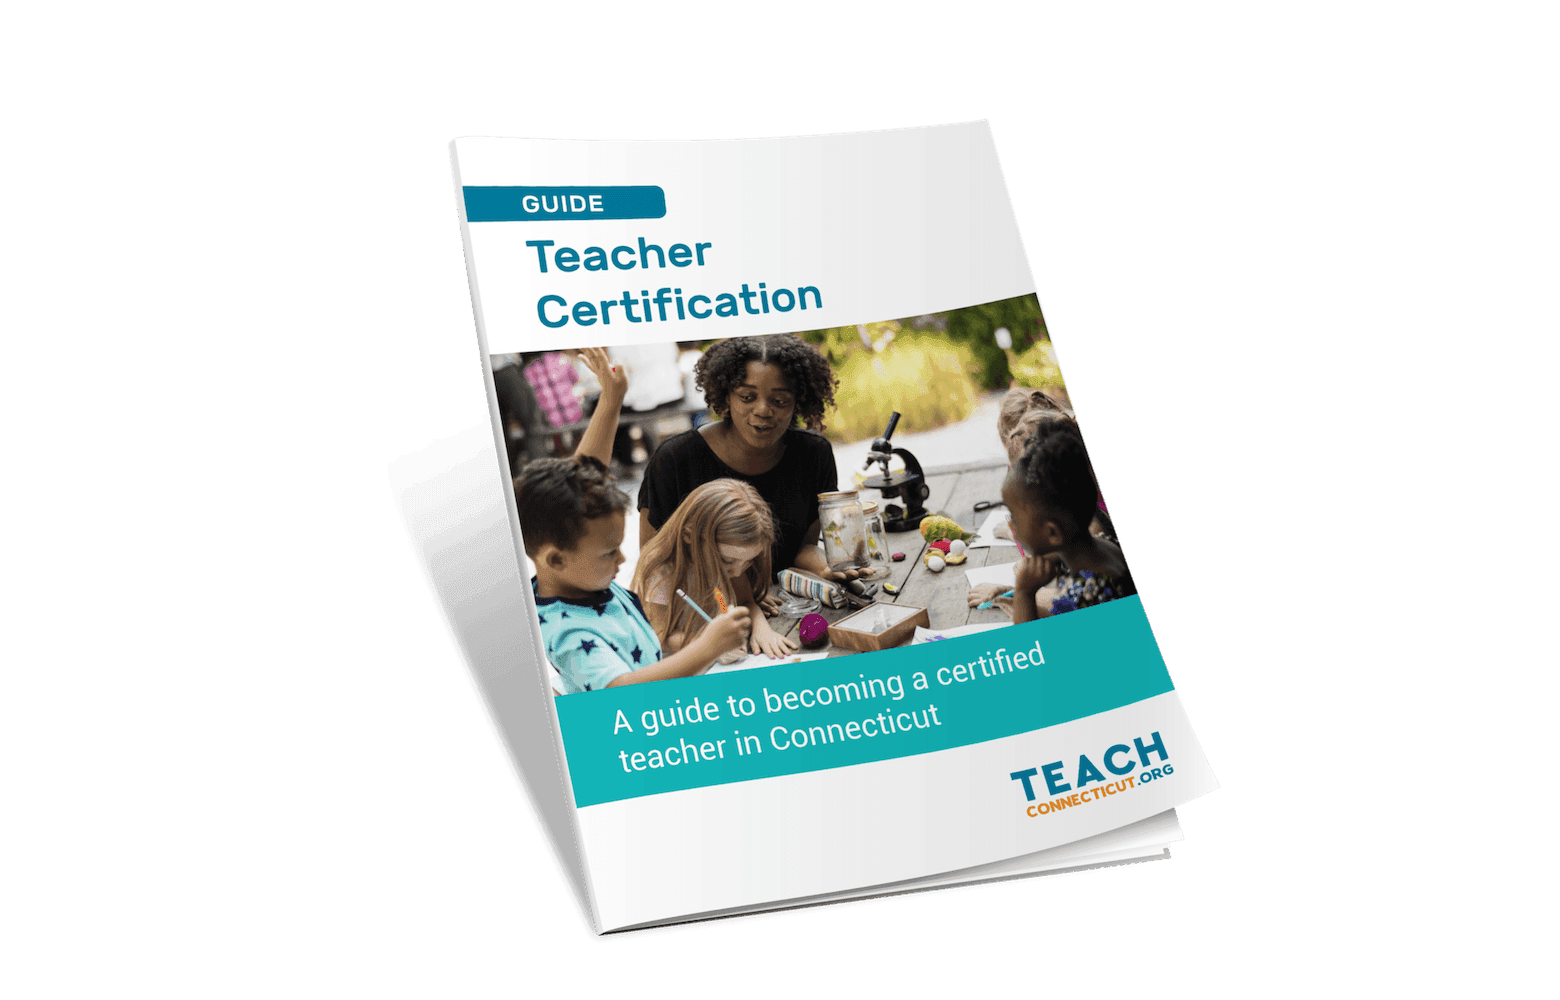 The cover of the TEACH Connecticut Certification Guide